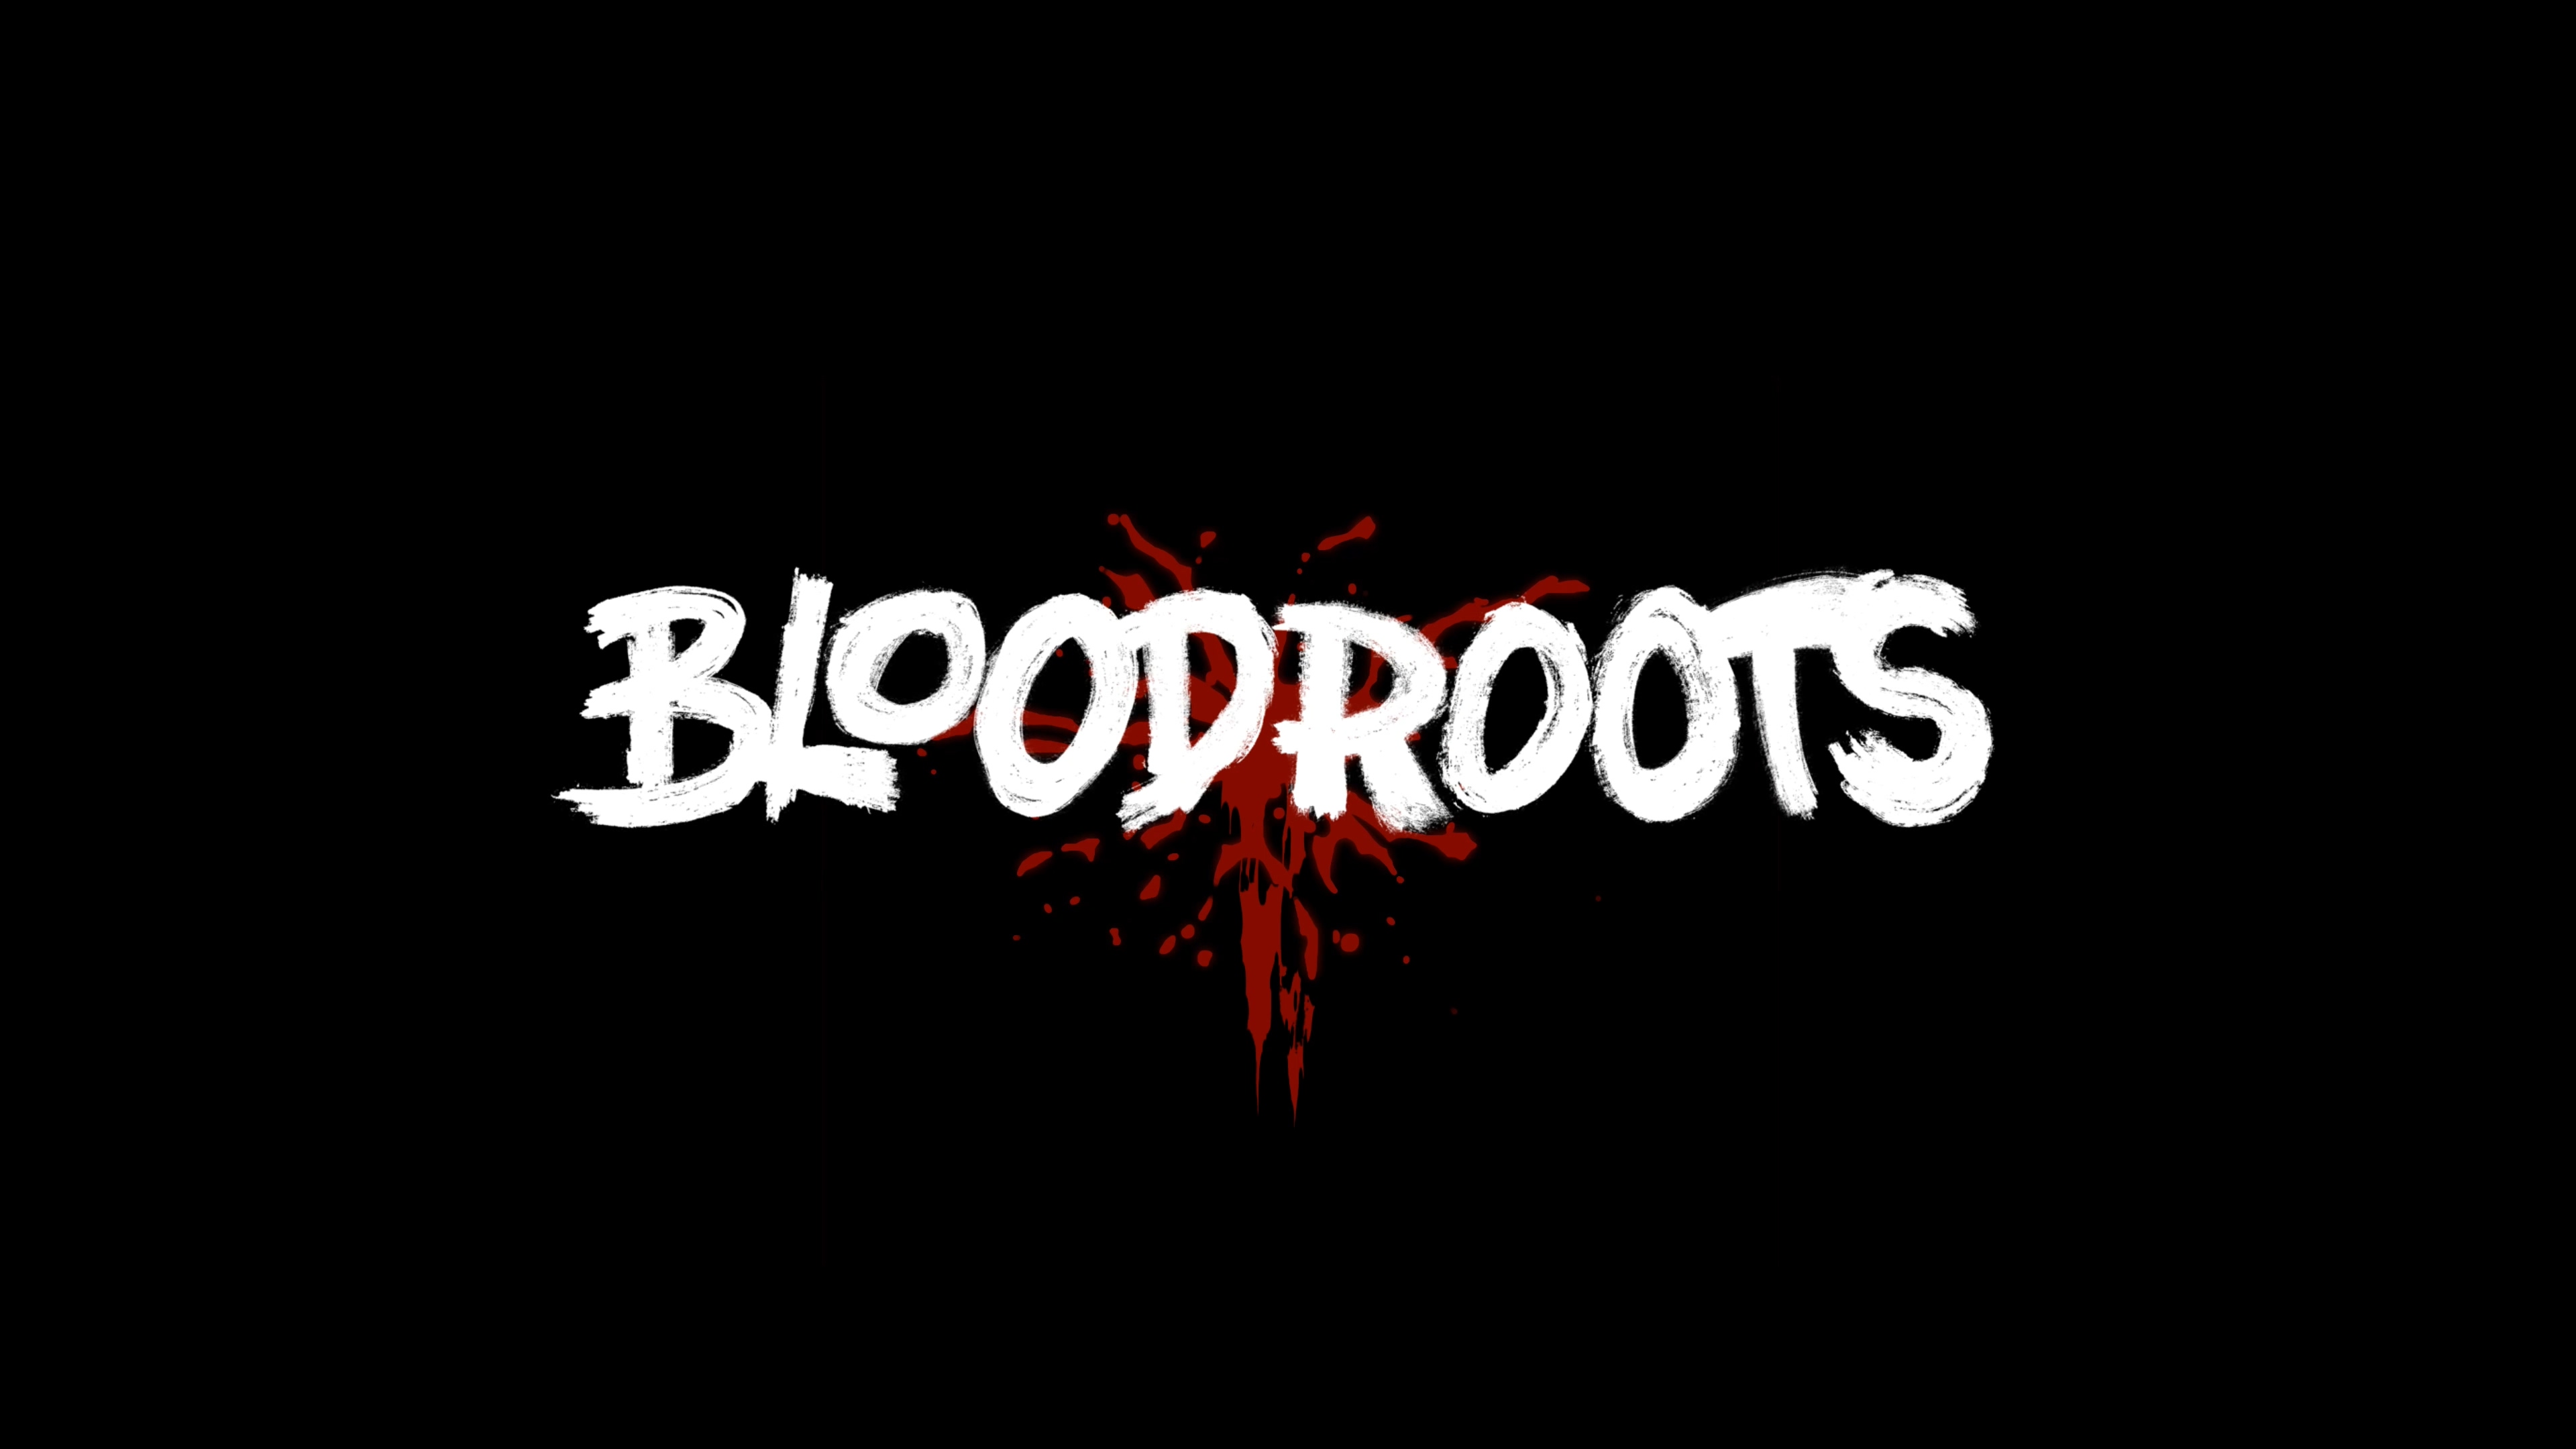 bloodroots opening.mp4_20210715_205158.985.jpg